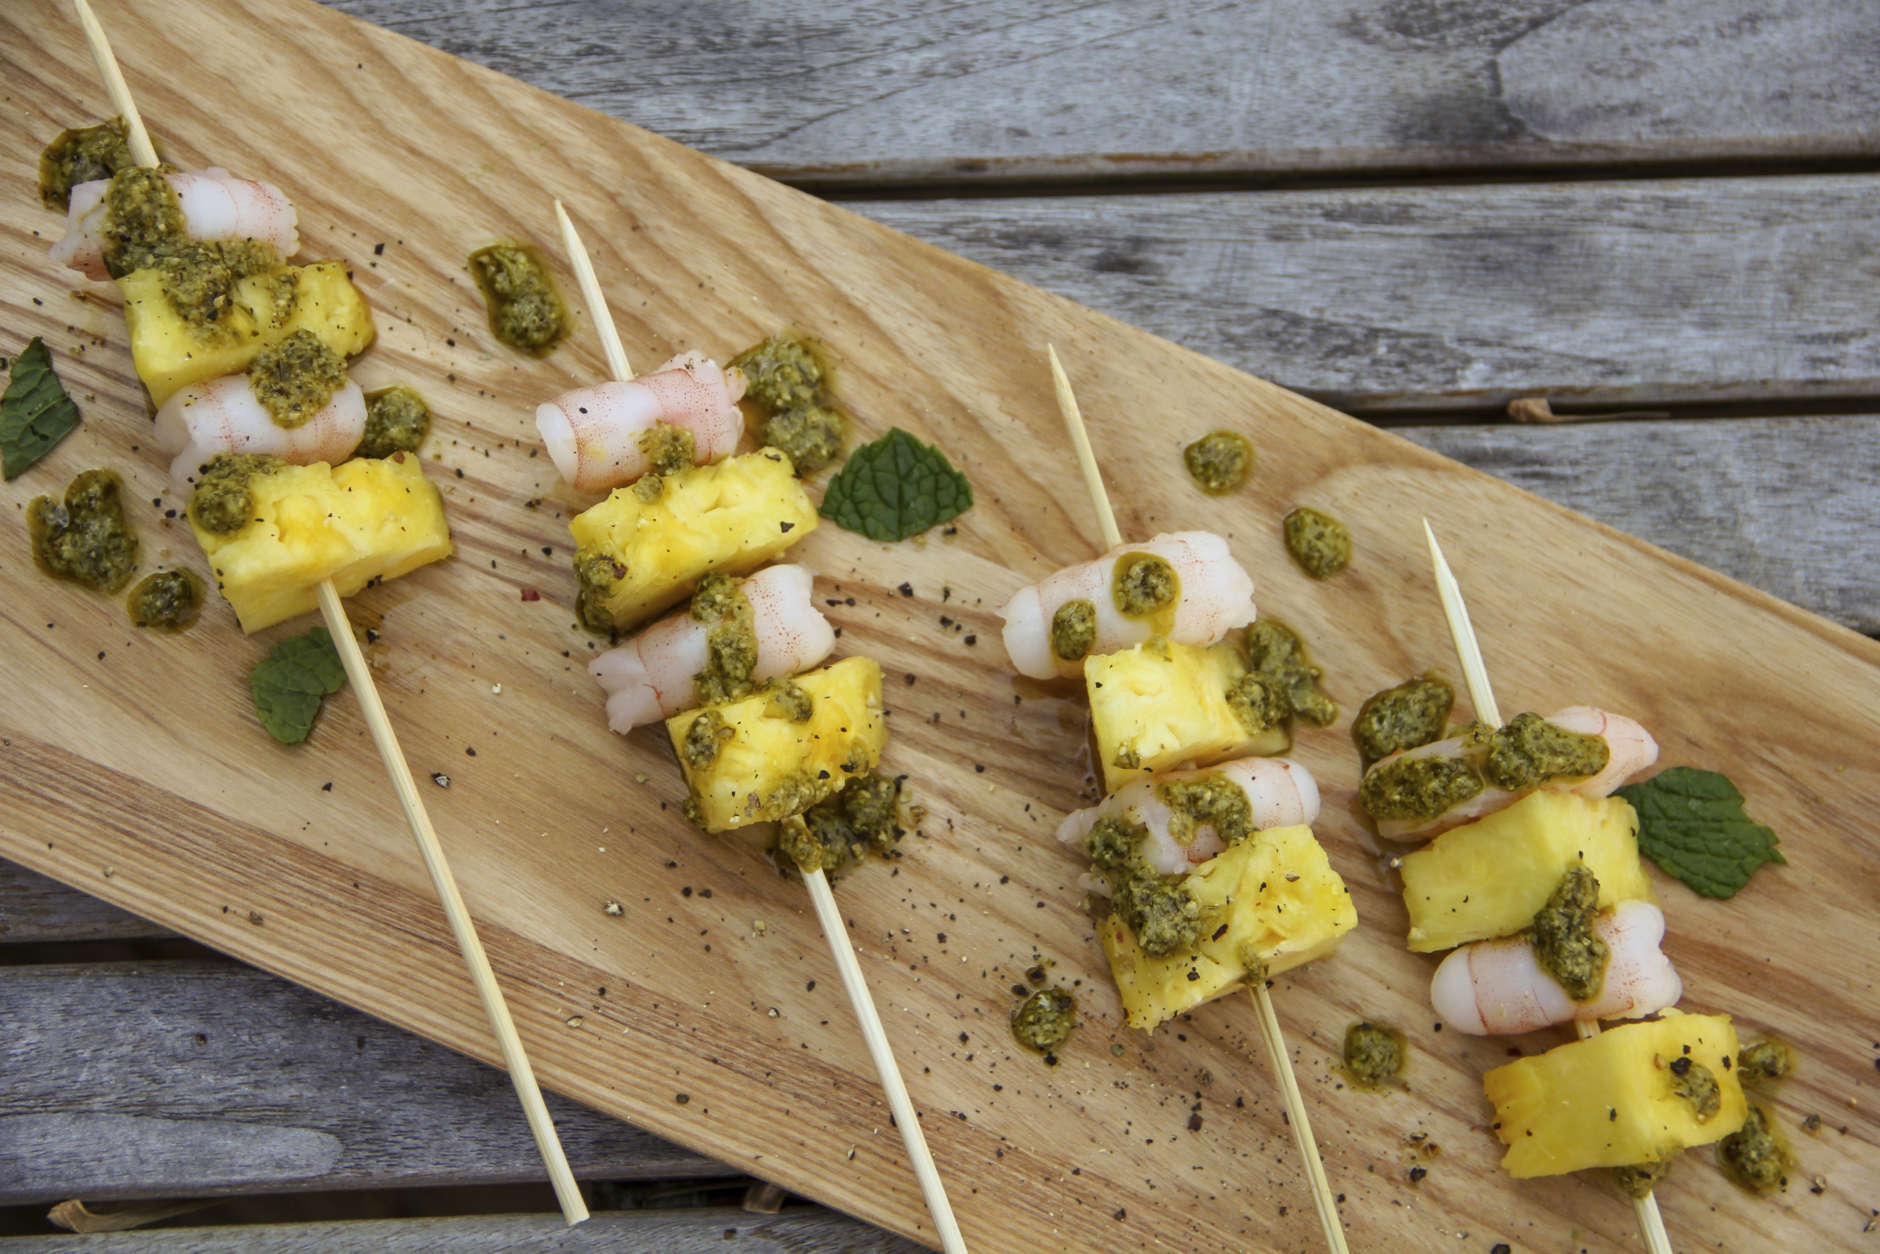 This Dec. 26, 2017 photo shows shrimp and pineapple skewers in Bethesda, Md. A super easy go-to recipe, which uses easy pantry ingredients, you can even use canned pineapple, to create something that still feels high-end. (Melissa daArabian via AP)